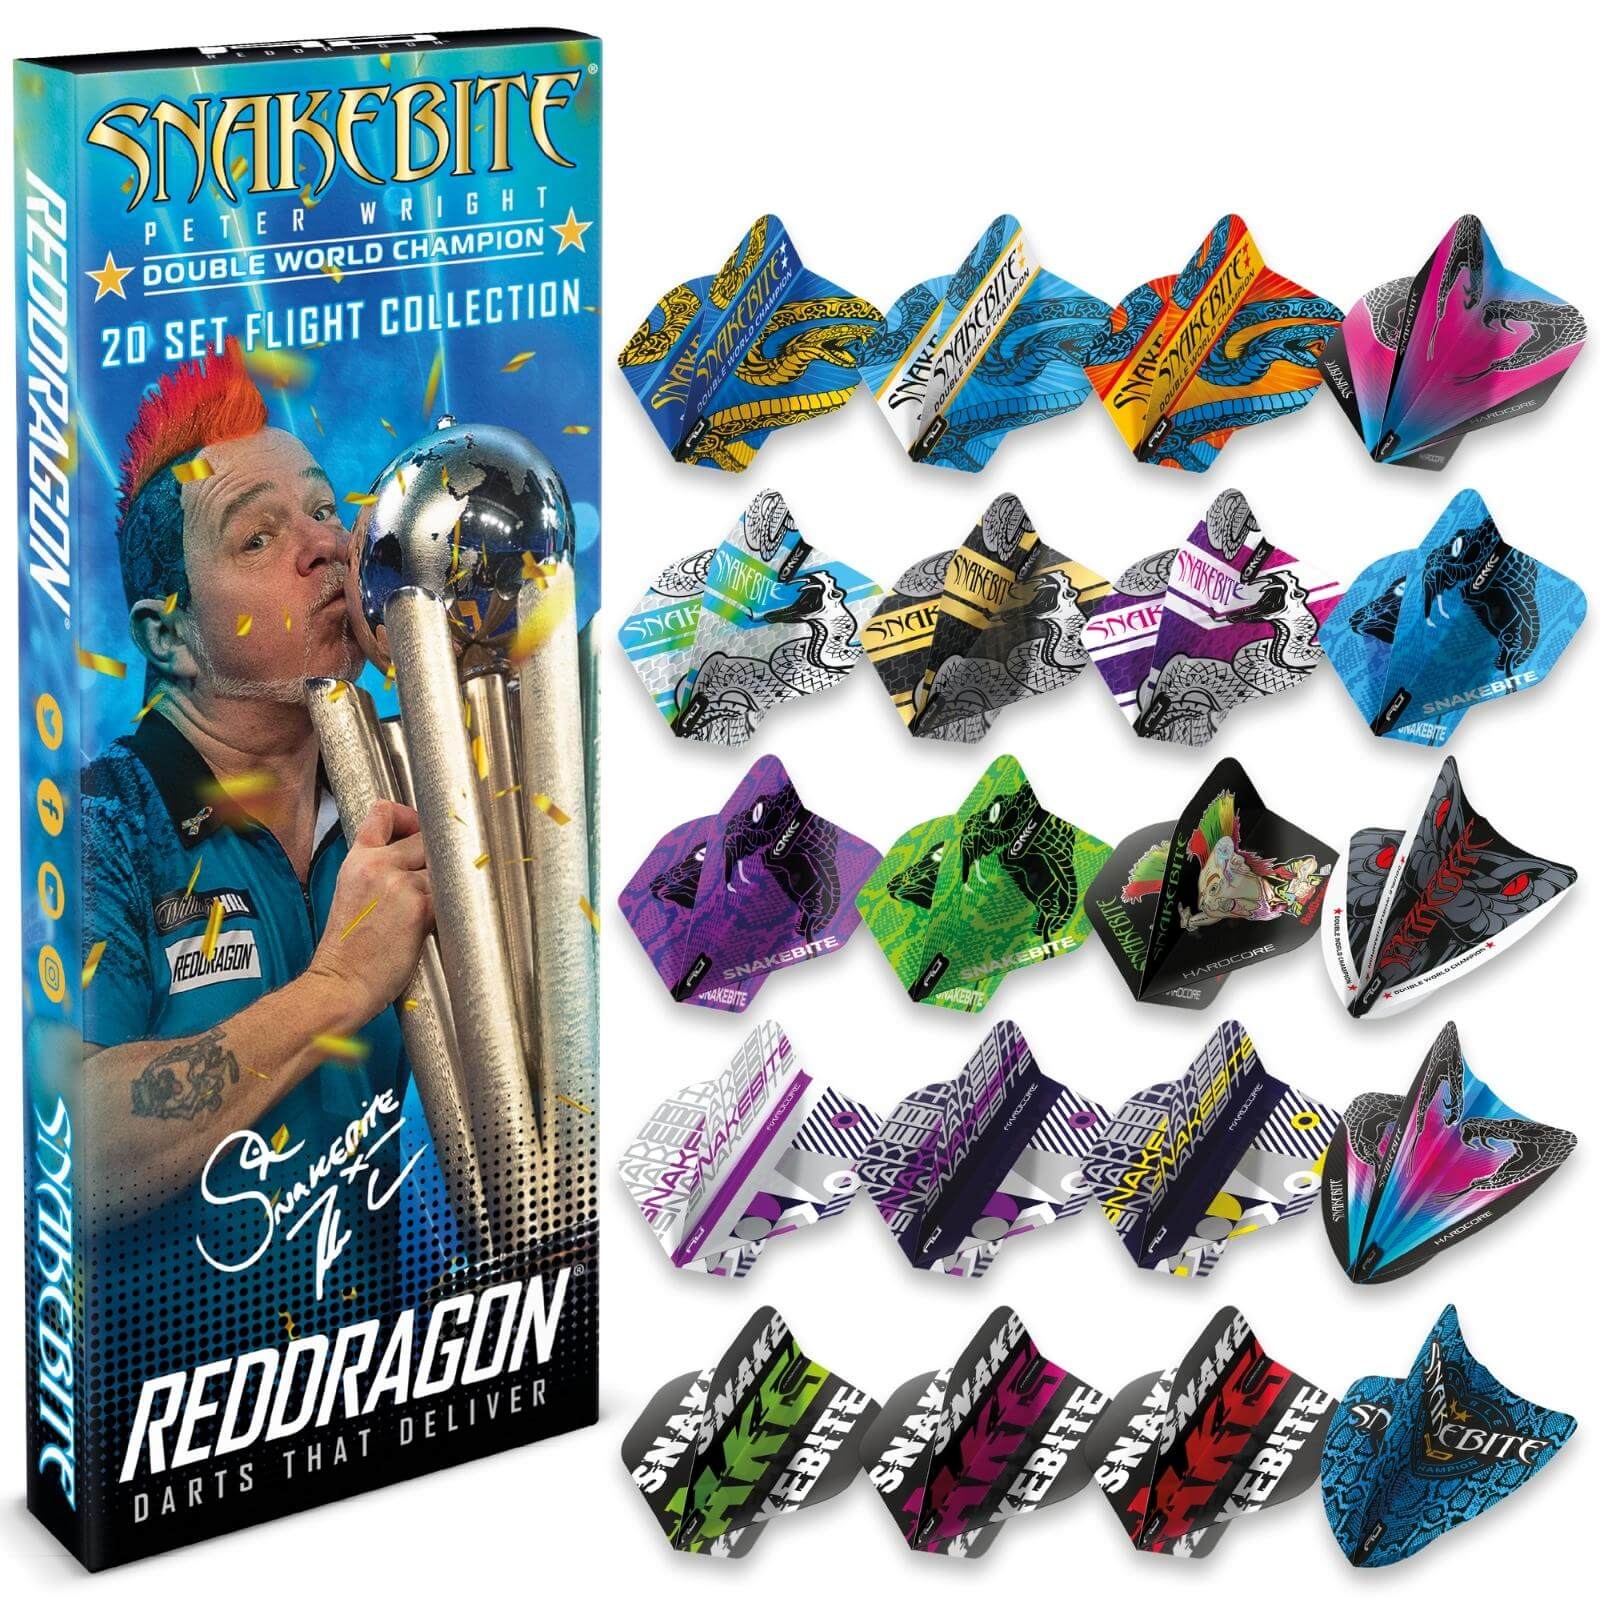 Dart Flights - Red Dragon - Peter Wright Double World Champion Flight Collection - 20 Sets 